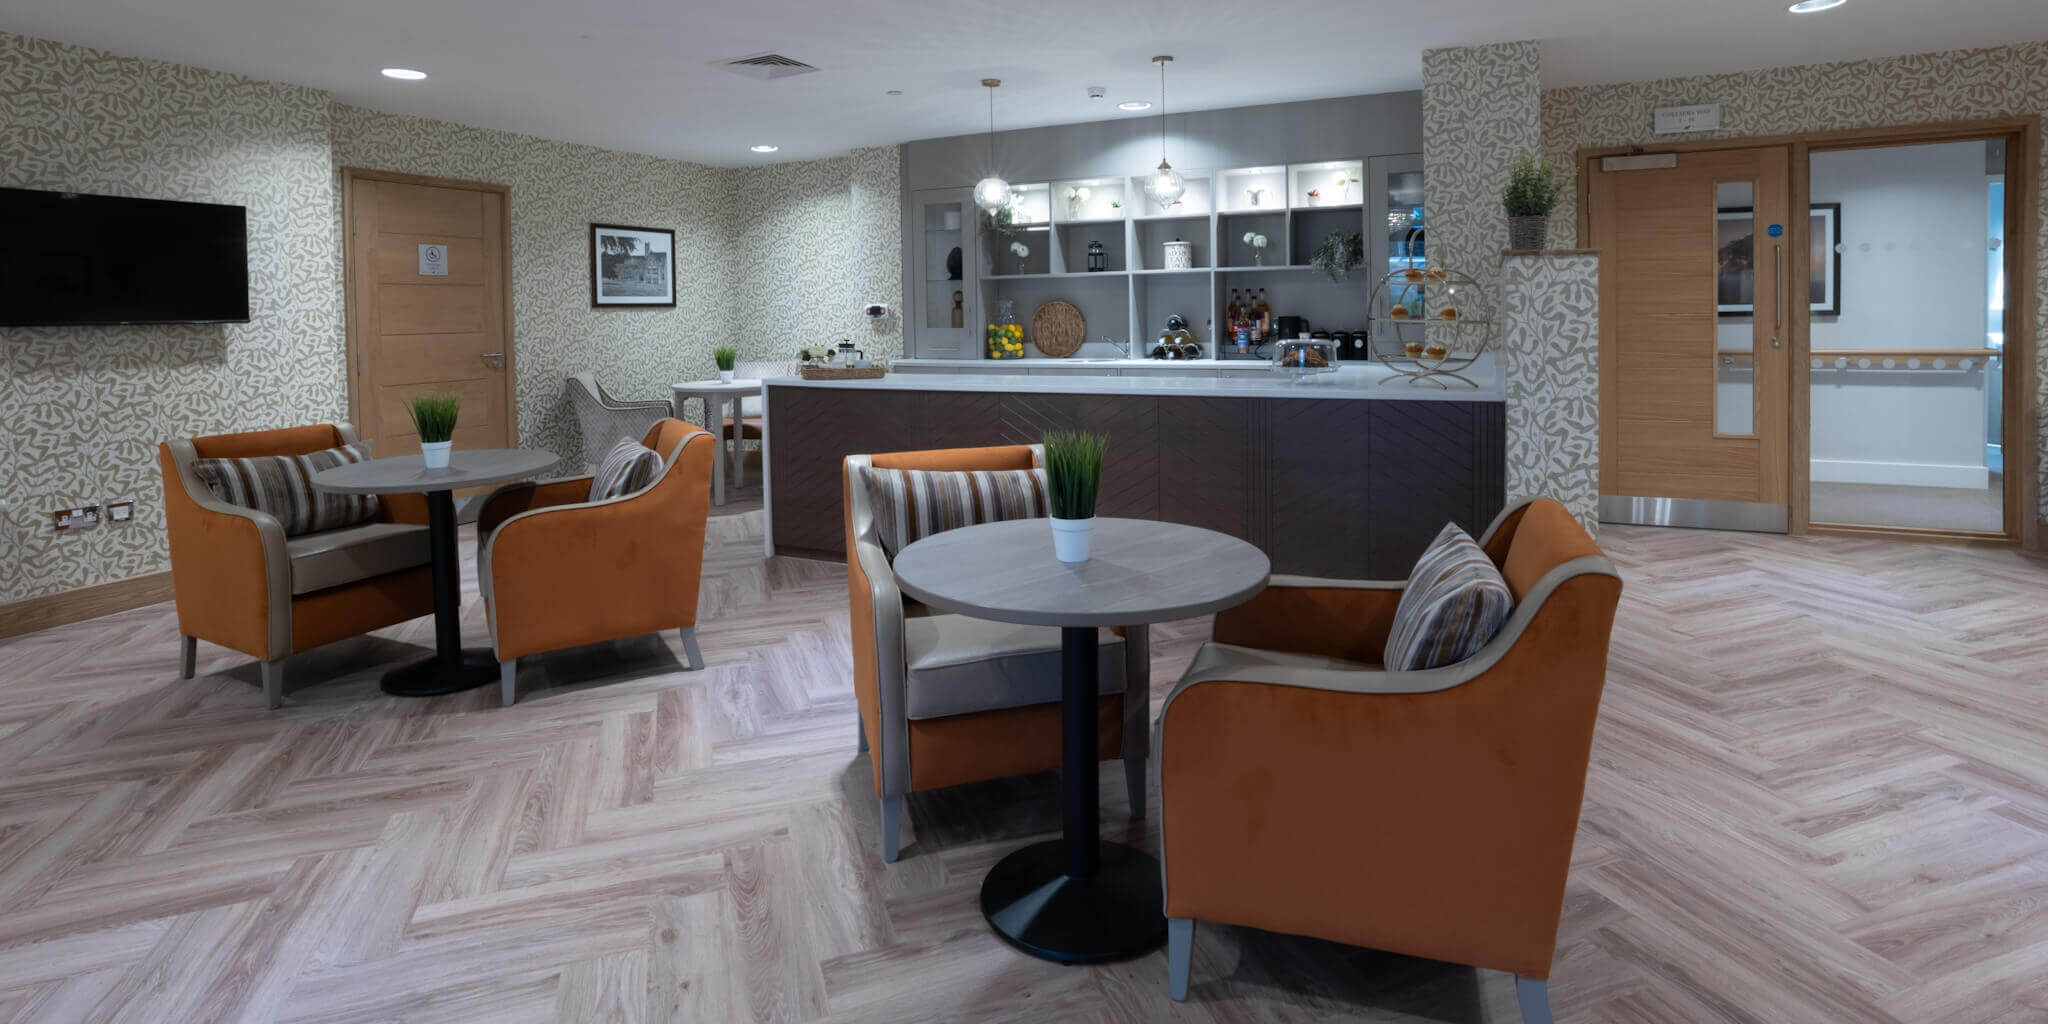 Cafe and Seating at Rowan Park Care Home